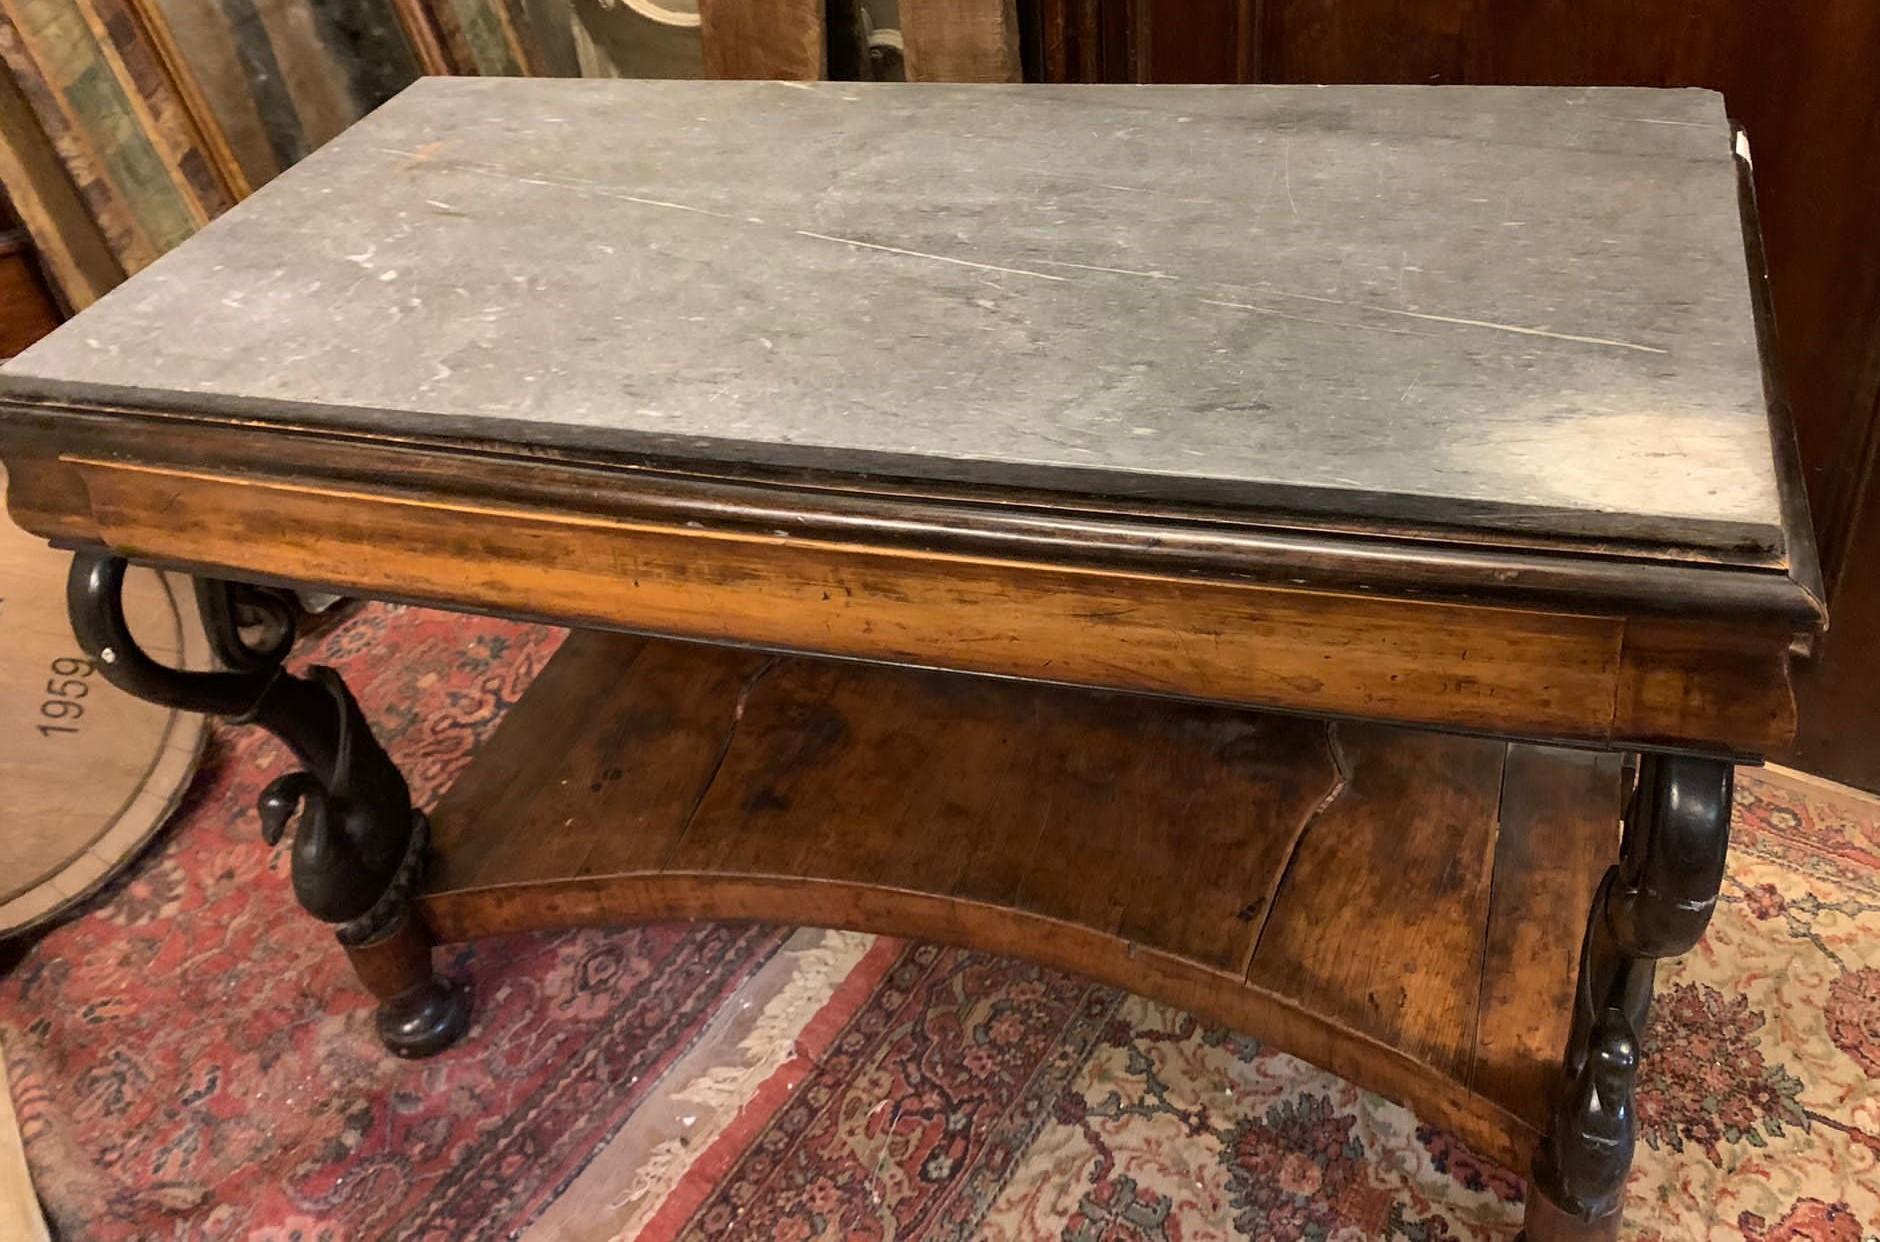 Antique Empire Console table, carved in solid walnut root wood, columns with sculpted and bent black swans, with secret drawer in the pediment and original gray marble top, bent details, hand-built in Italy at the beginning of the 19th century, size